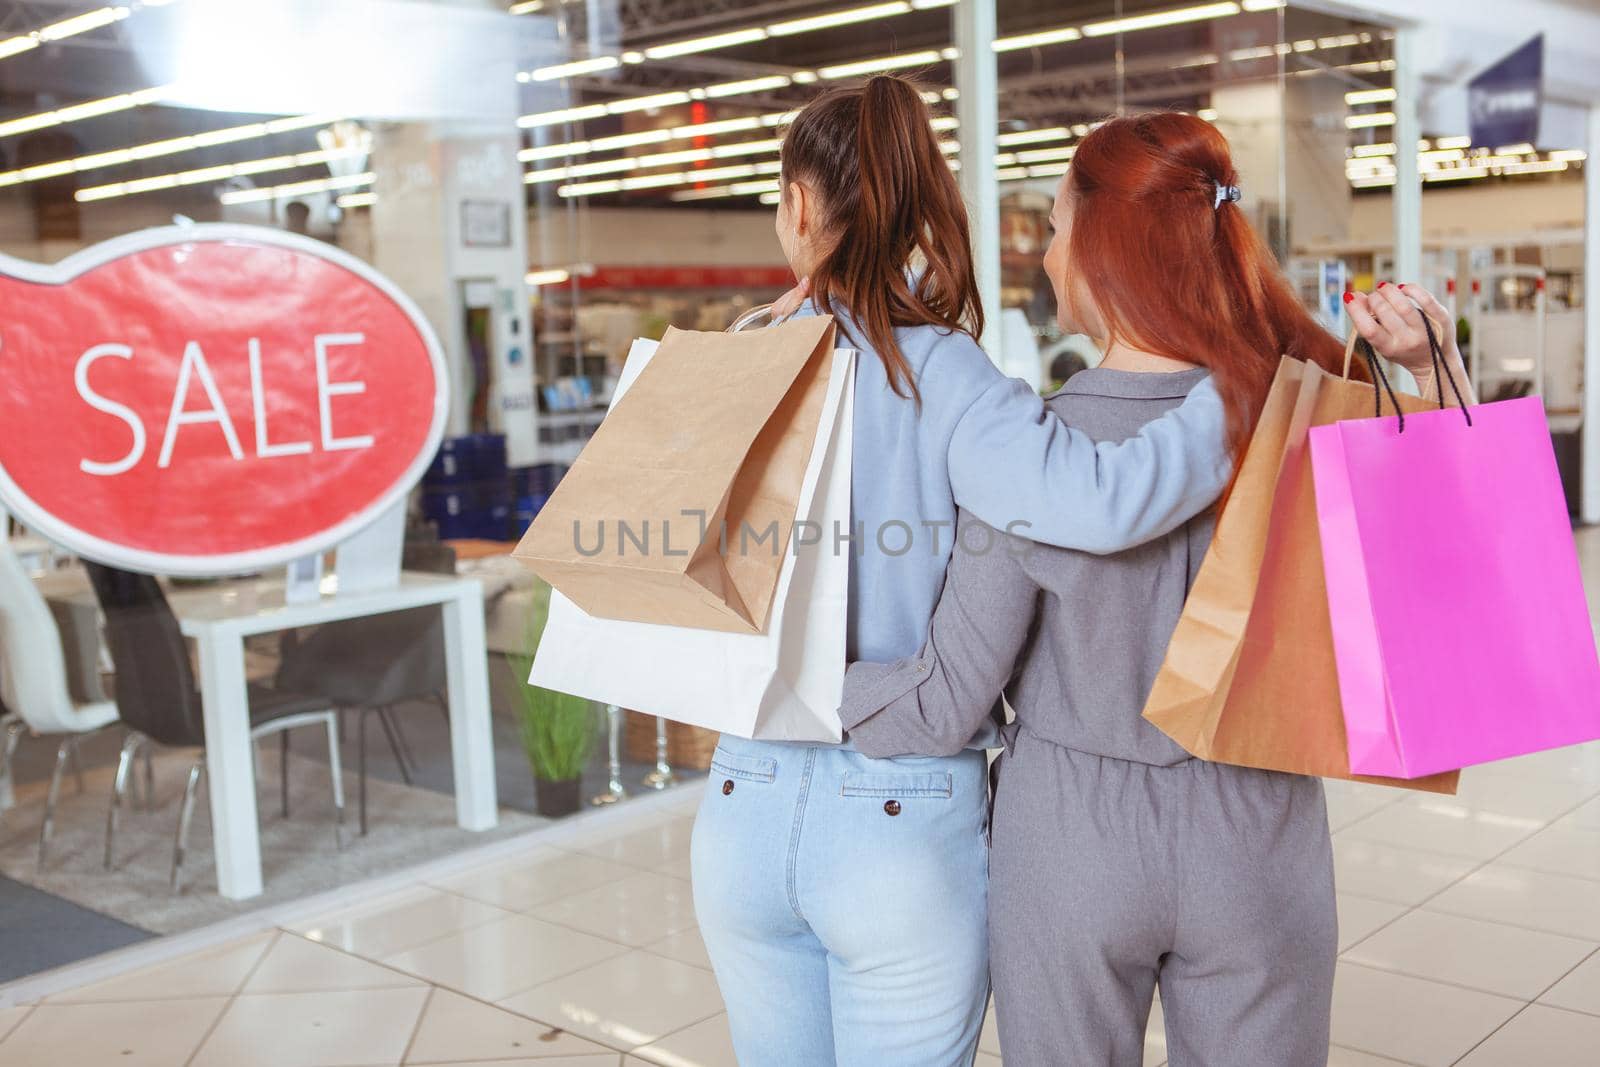 Rear view shot of two women enjoying shopping together, carrying shopping bags, looking at the display of a store